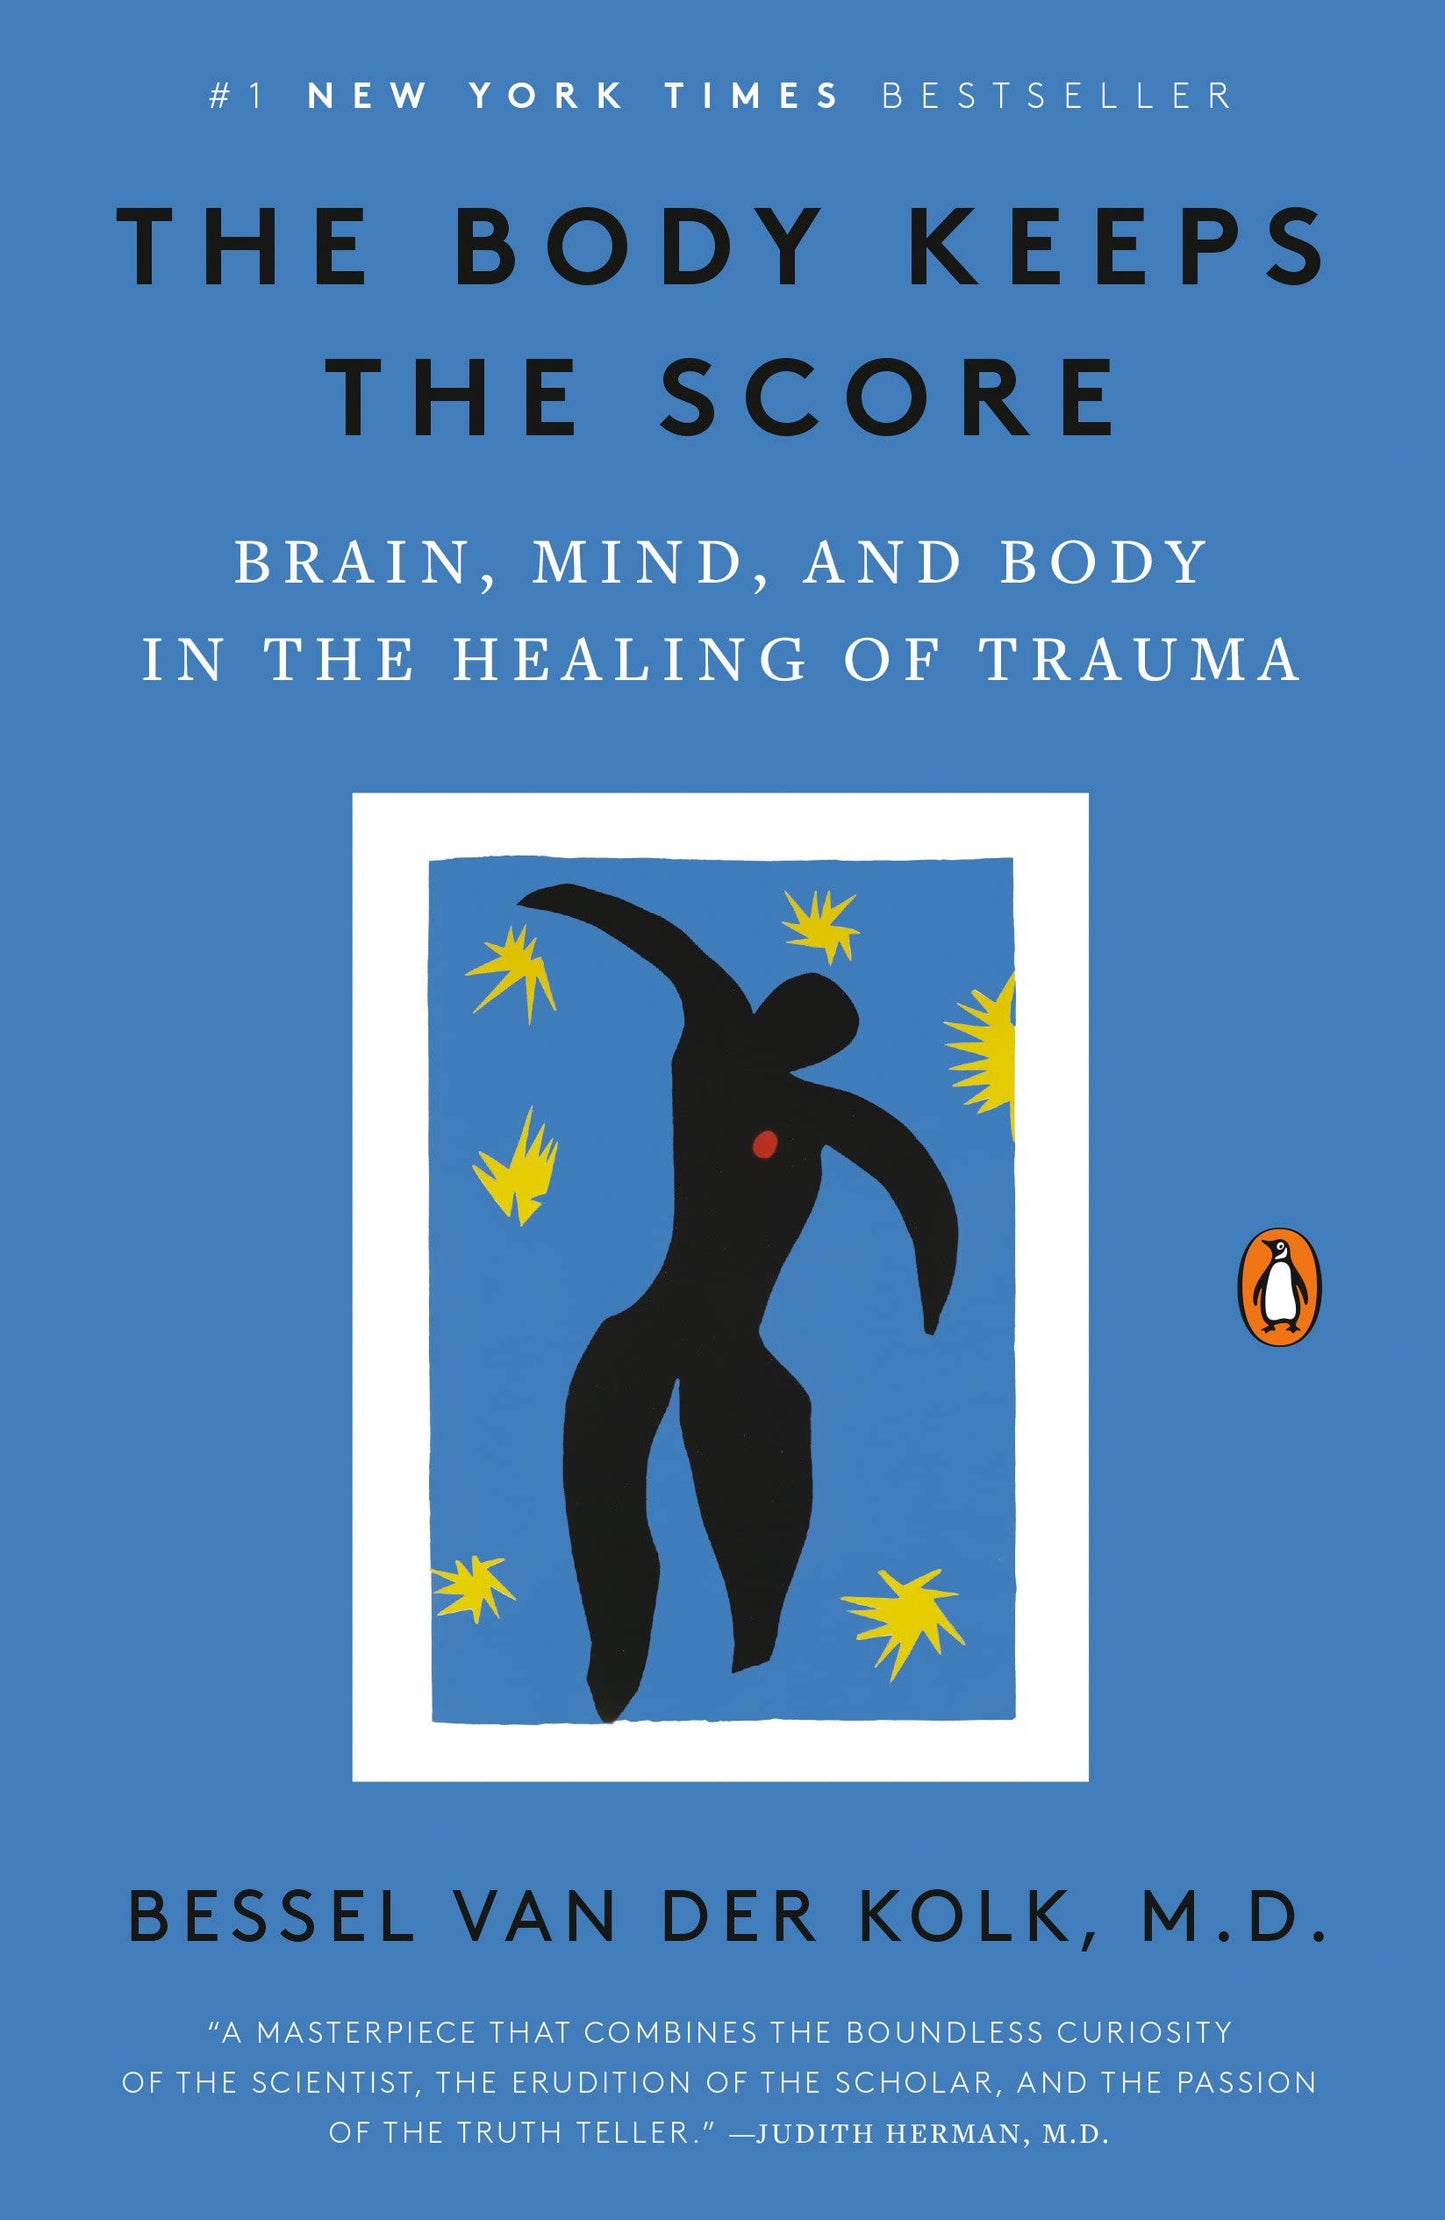 Body Keeps the Score: Brain, Mind, and Body in the Healing of Trauma